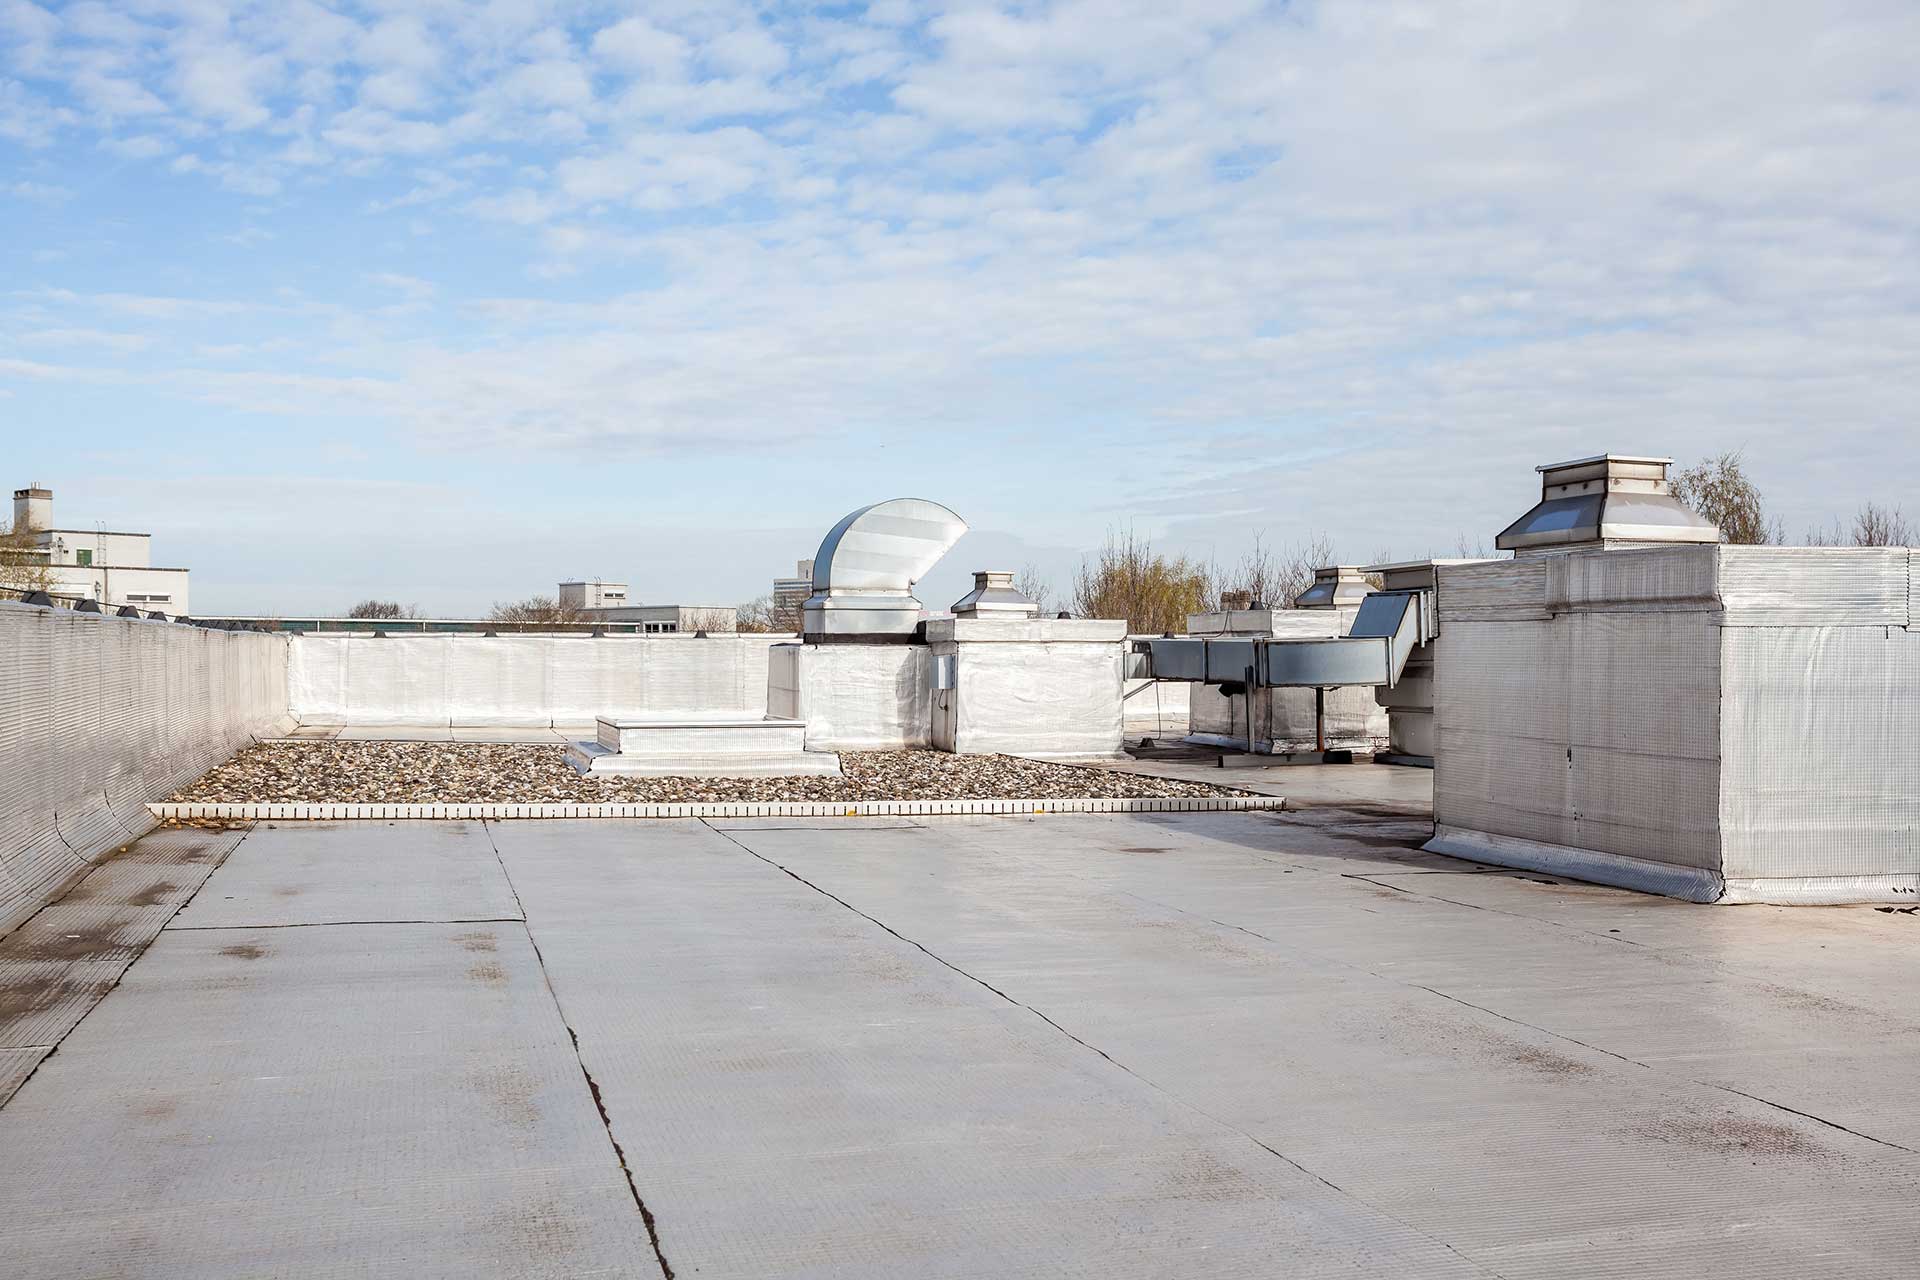 Flat roof of commercial building